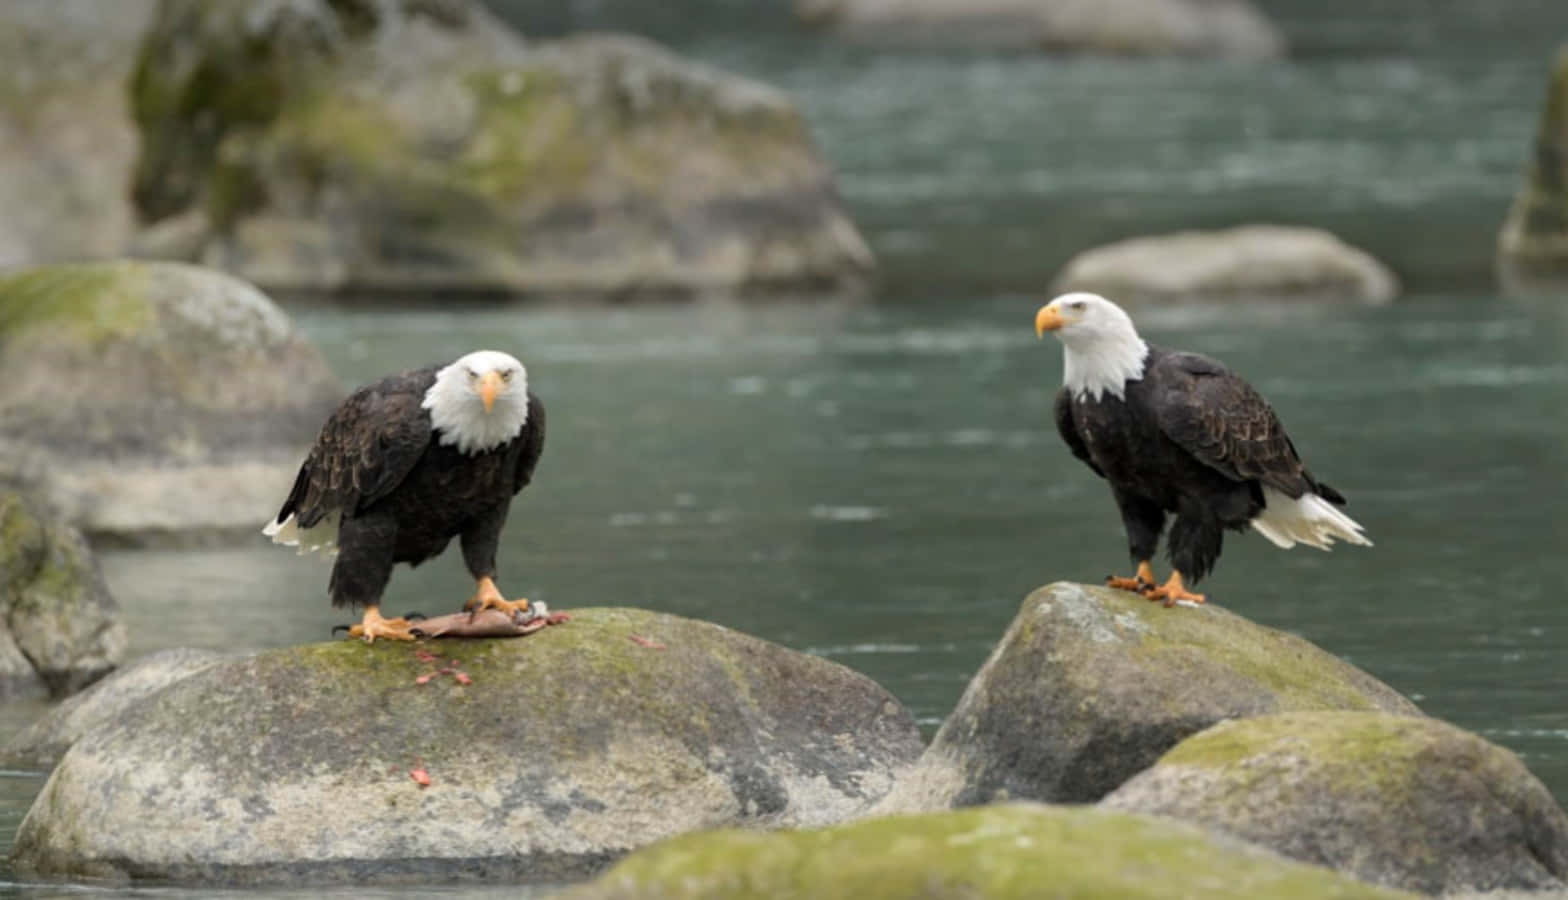 Two Bald Eagles Standing On Rocks In A River